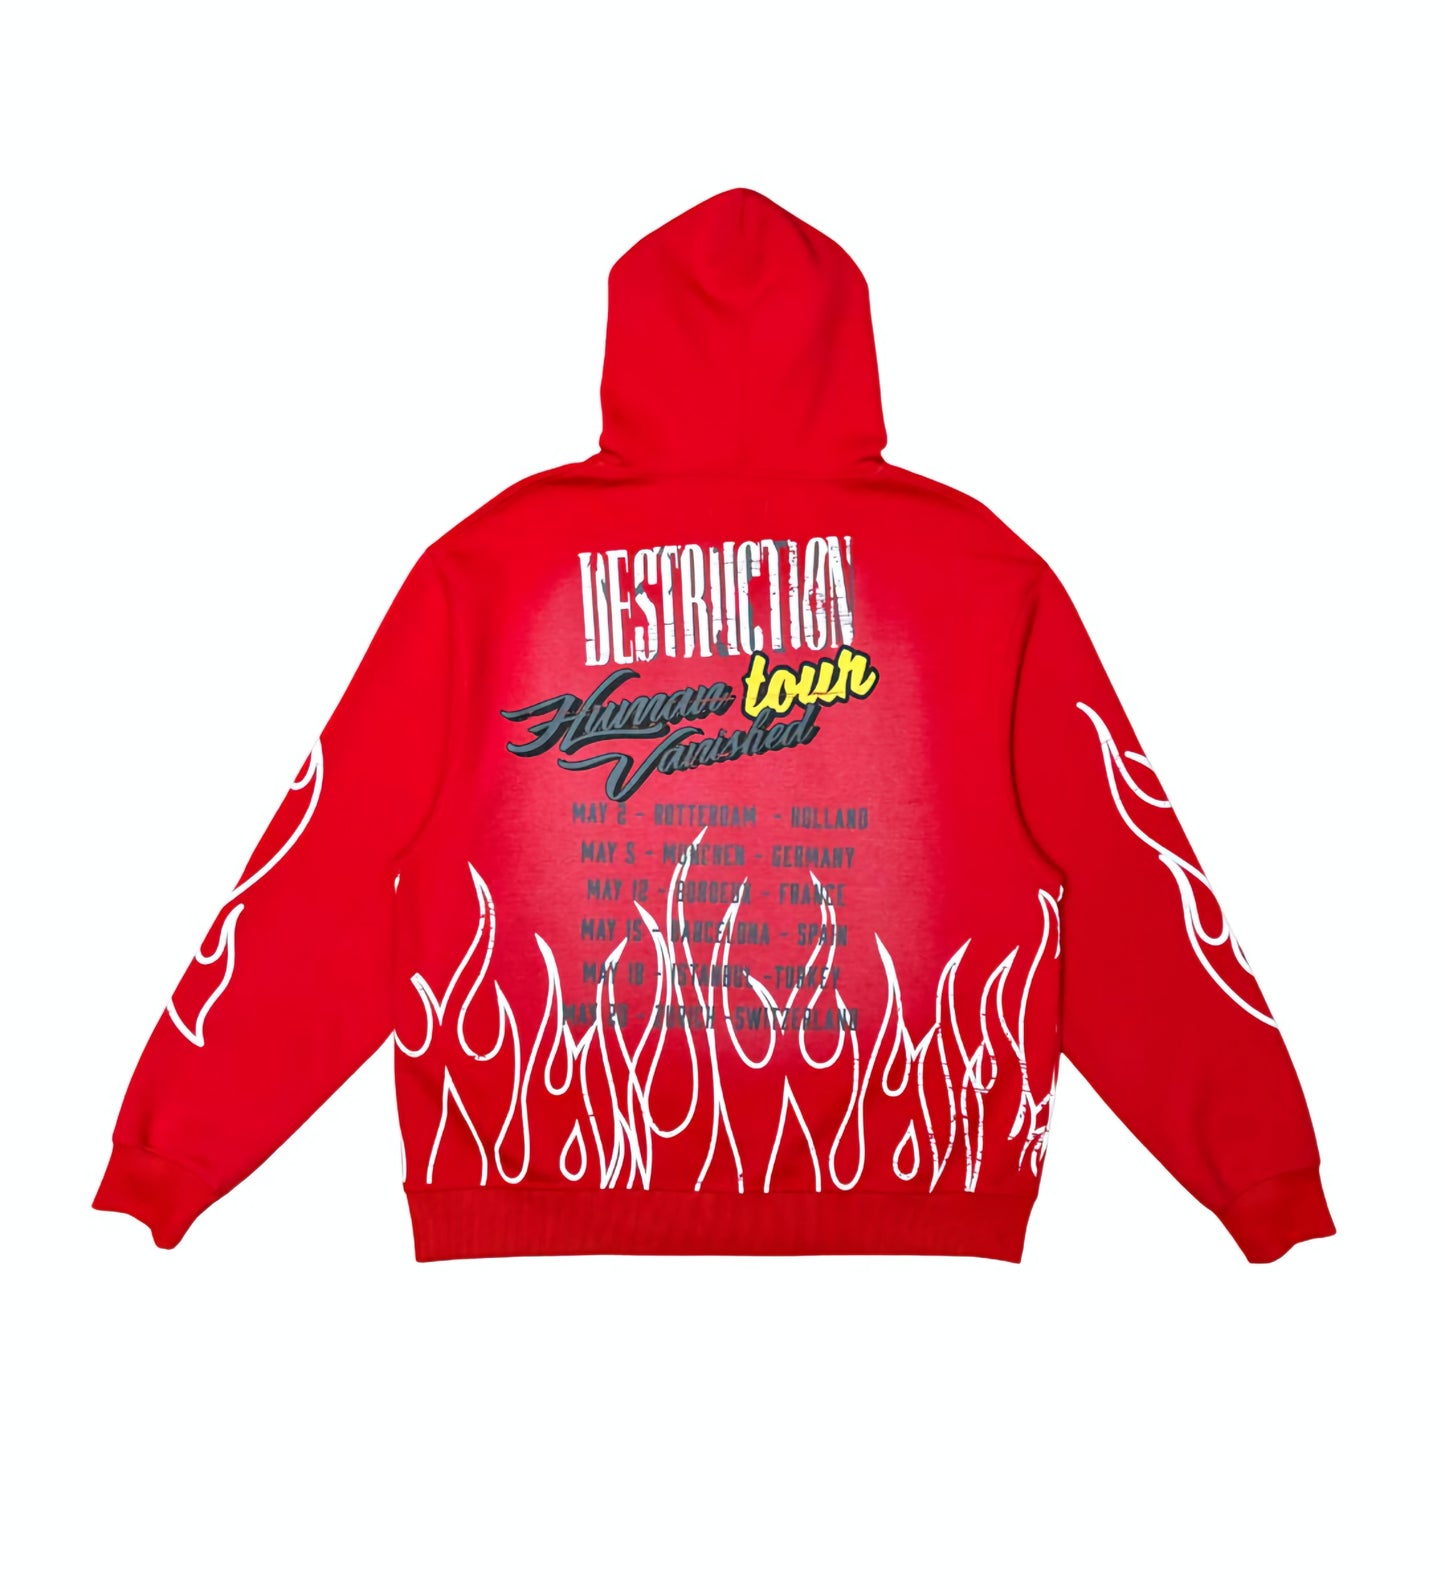 Civilized Hell Raiser Tour Hoodie (Red)